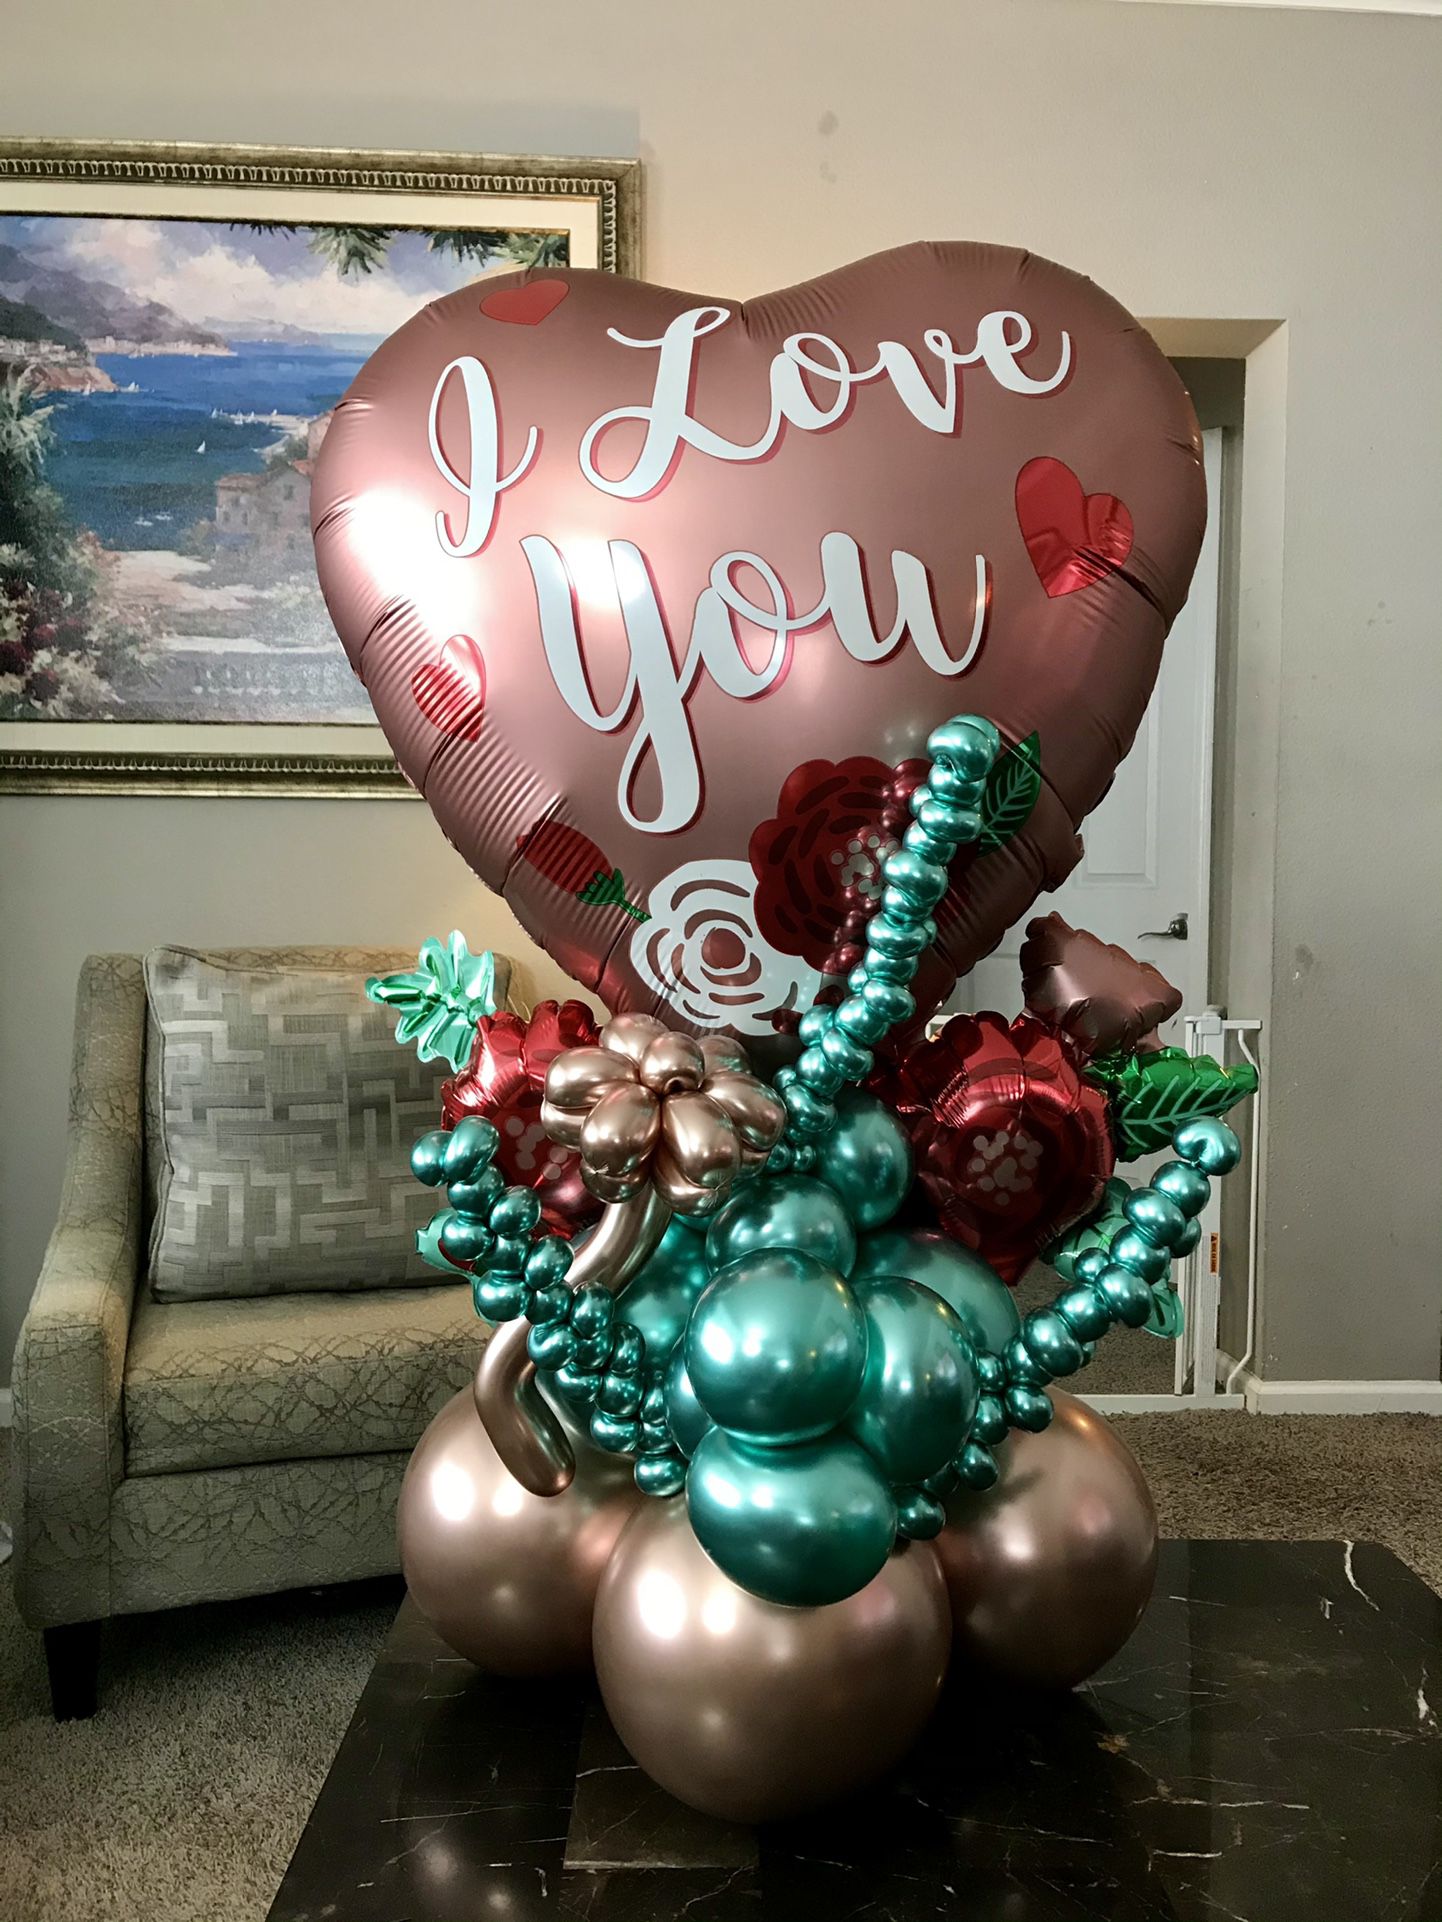 Balloon Bouquets For Valentines Starting Price $65